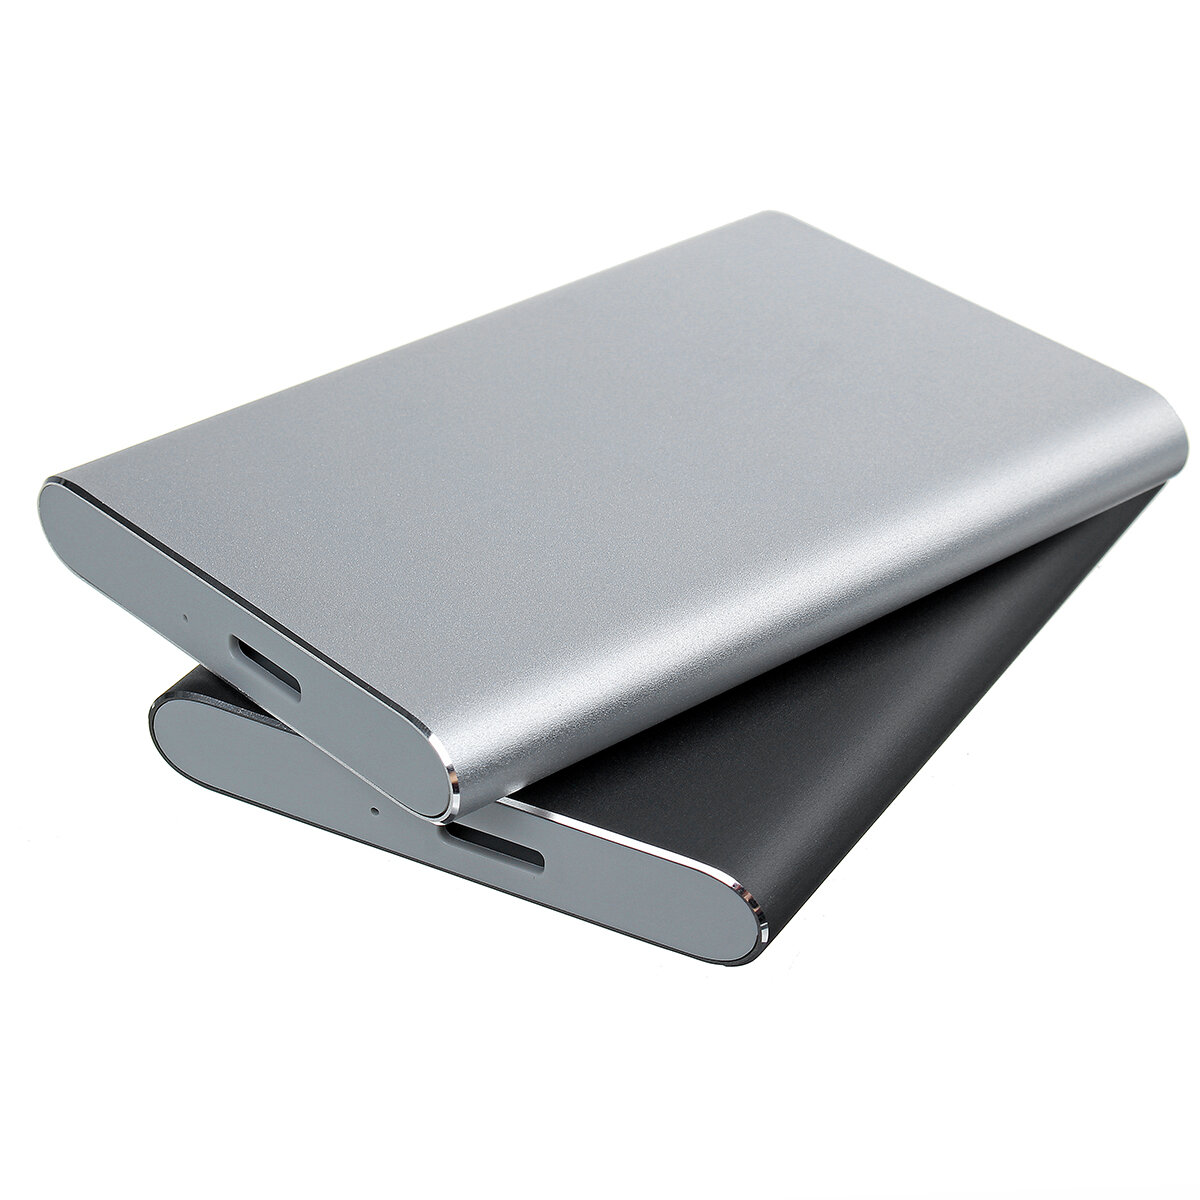 USB3.0 2.5'' SATA3.0 External Hard Drive Enclosure SSD HDD Case Solid State Drive Cover 6GBps for Ha